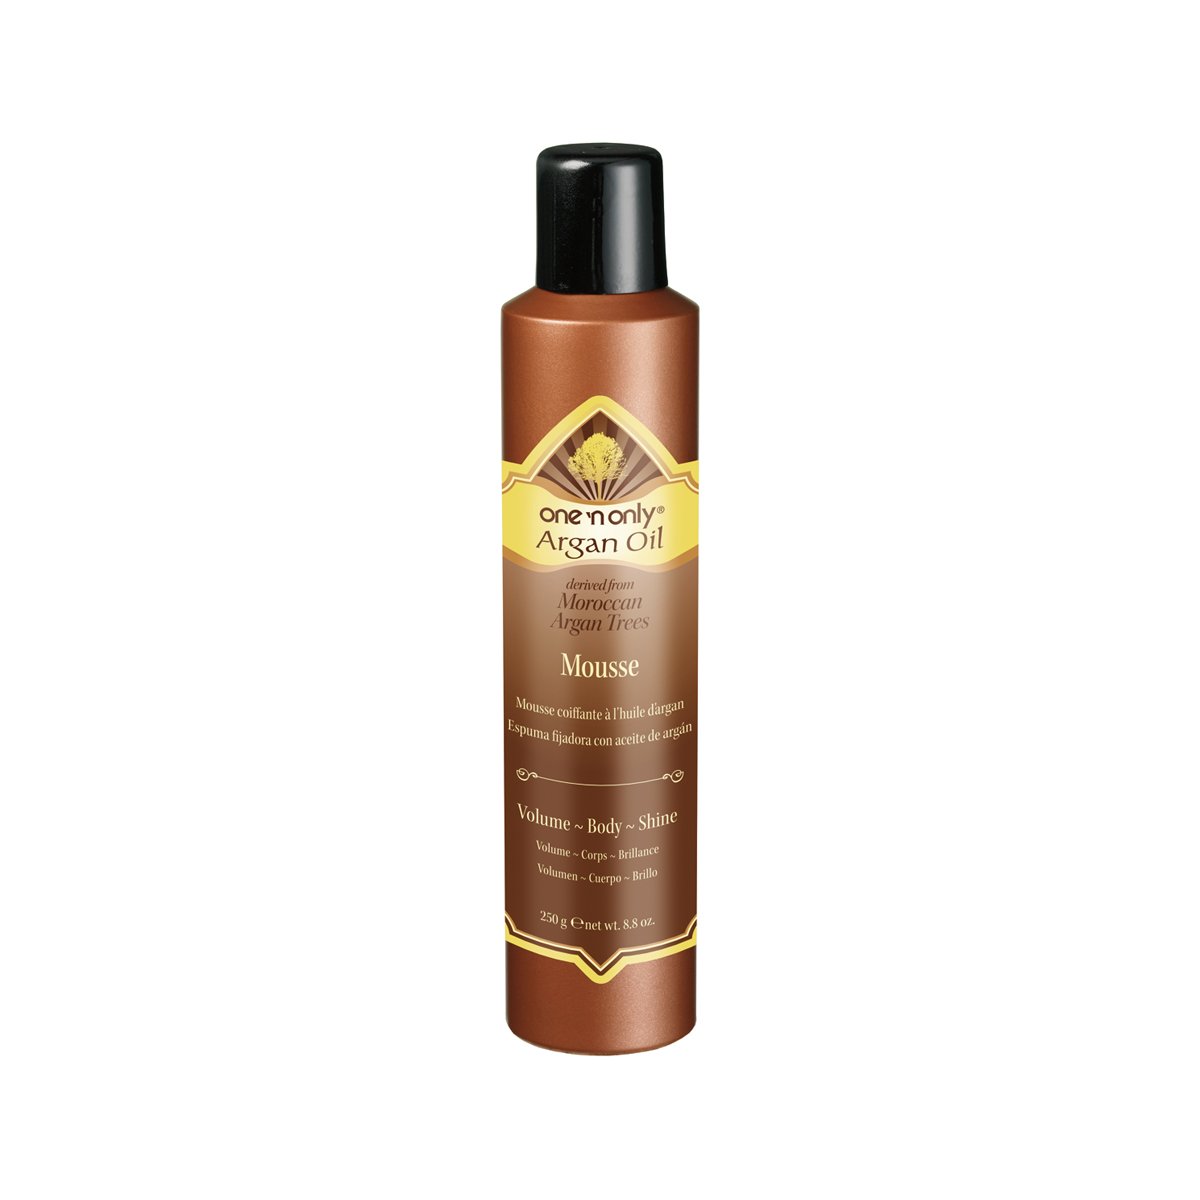 One'n Only Argan Oil Mouse 8.8 Oz